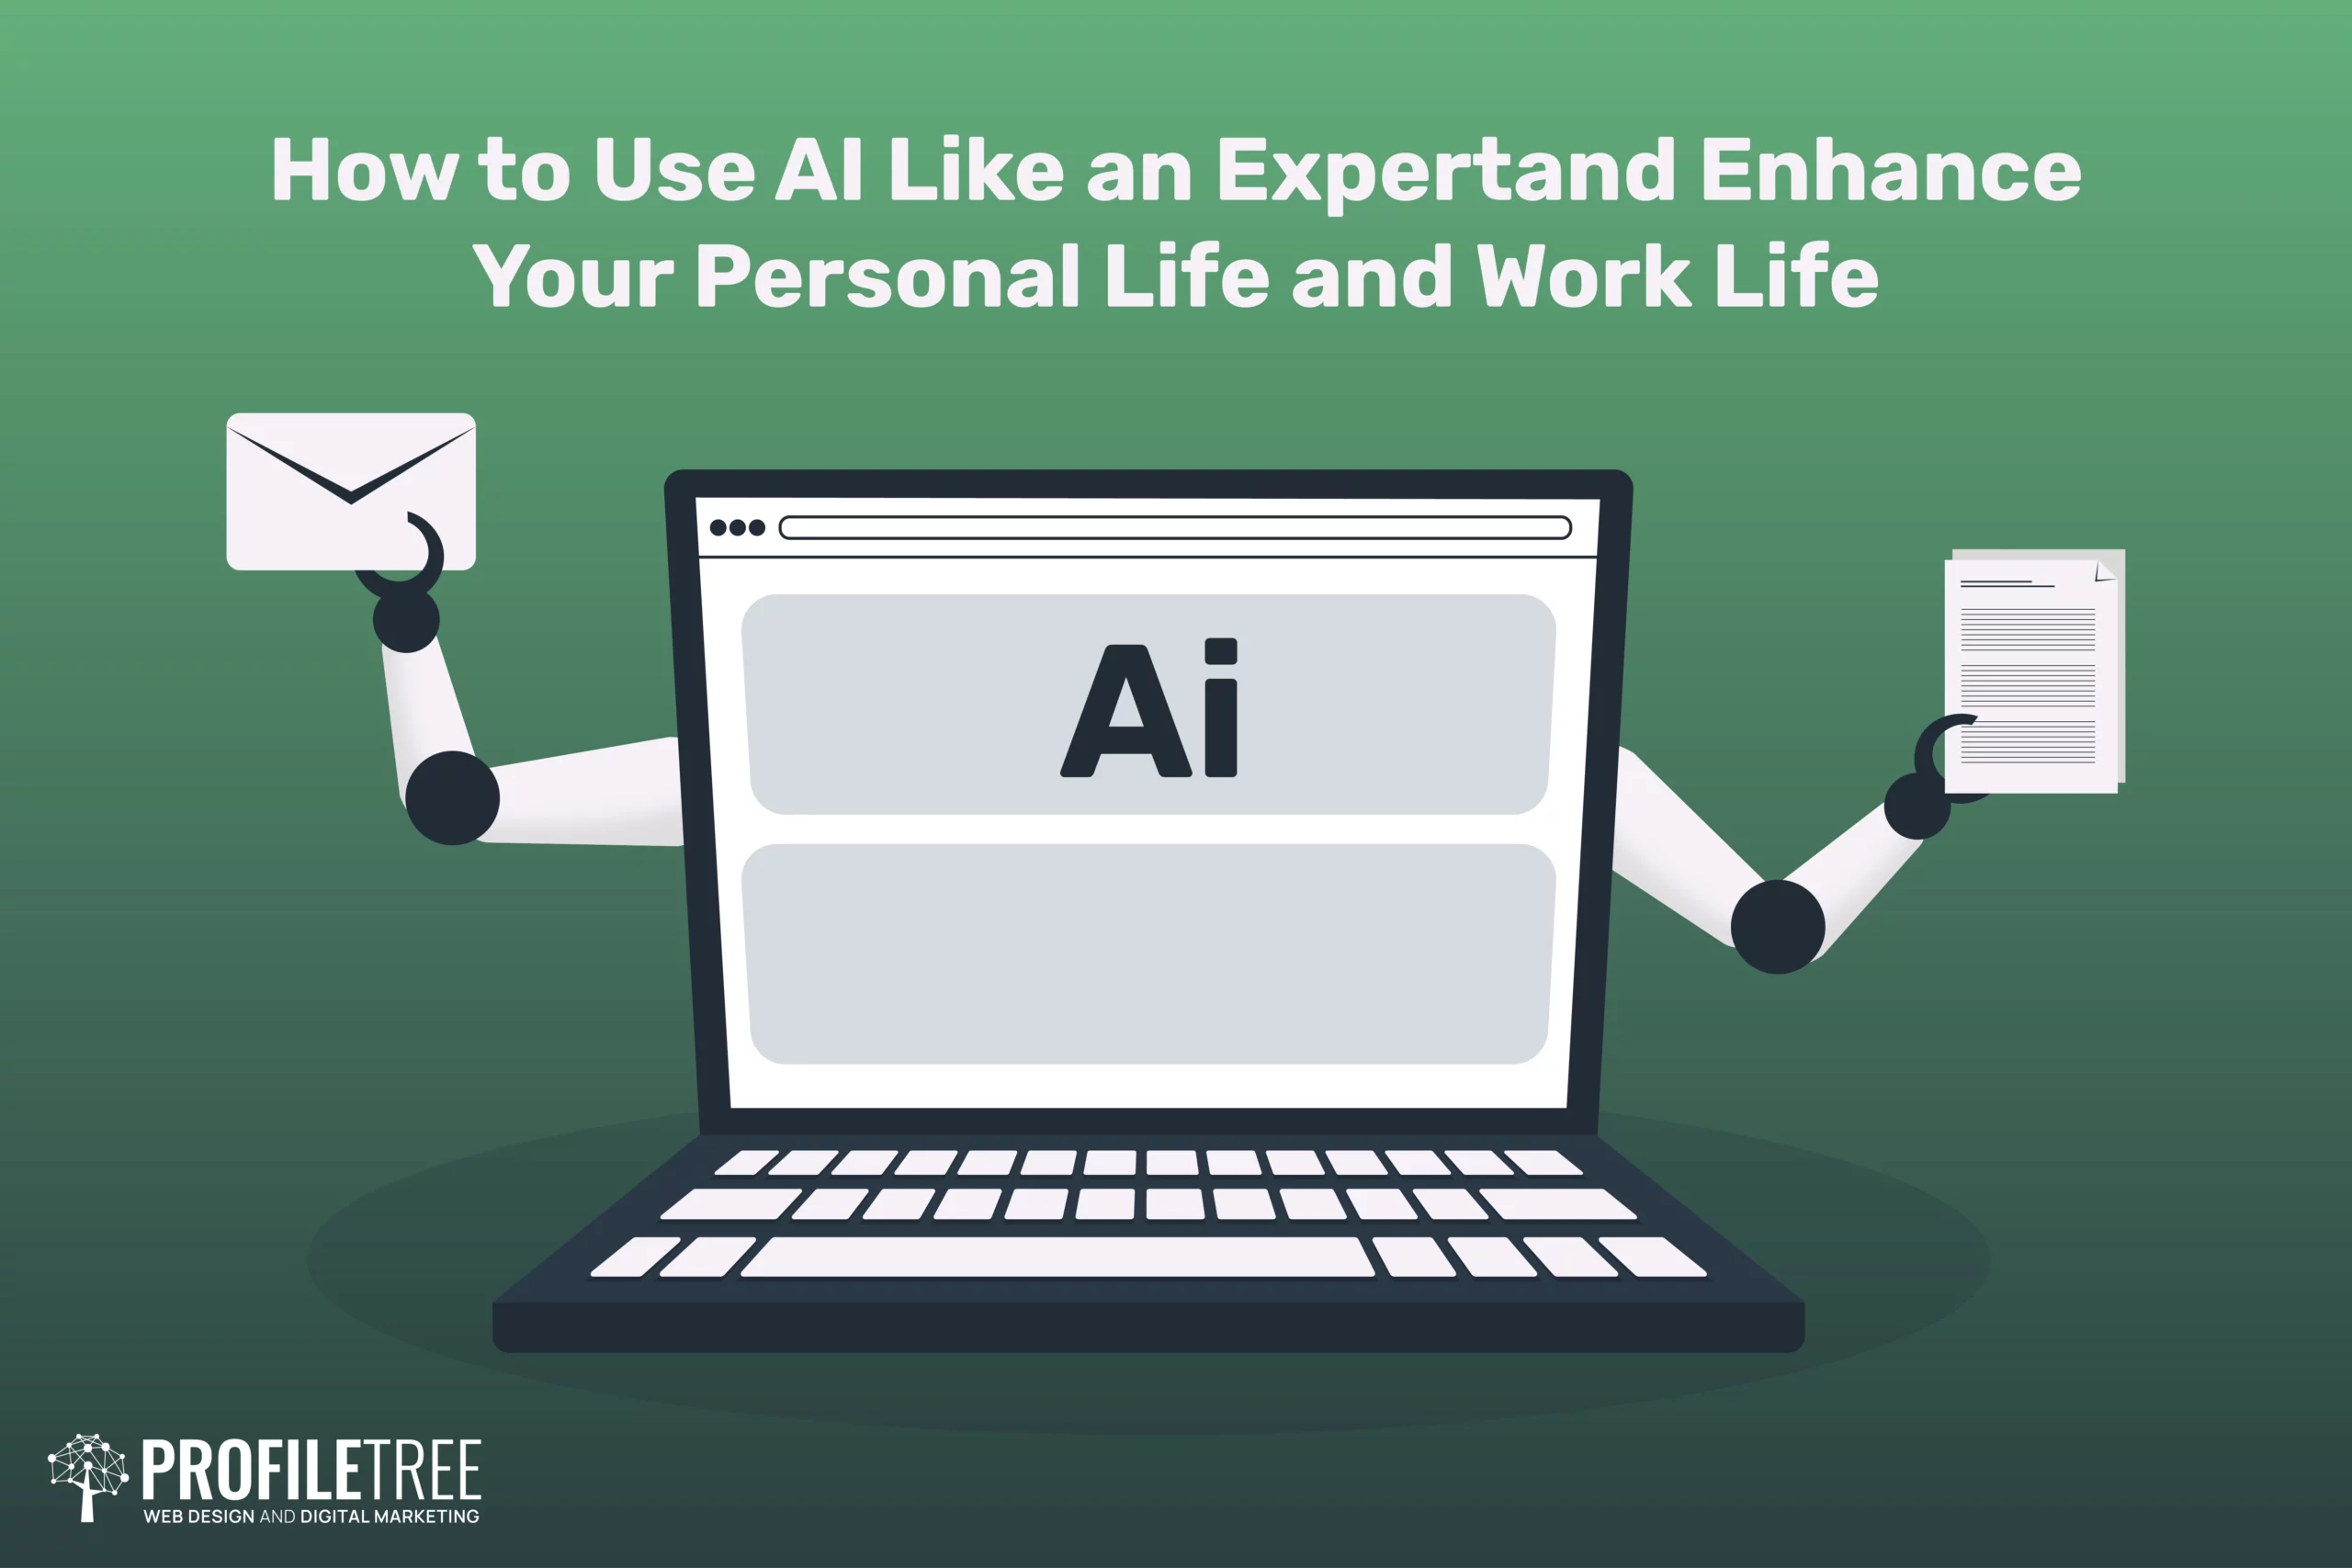 How to Use AI Like an Expert and Enhance Your Personal Life and Work Life